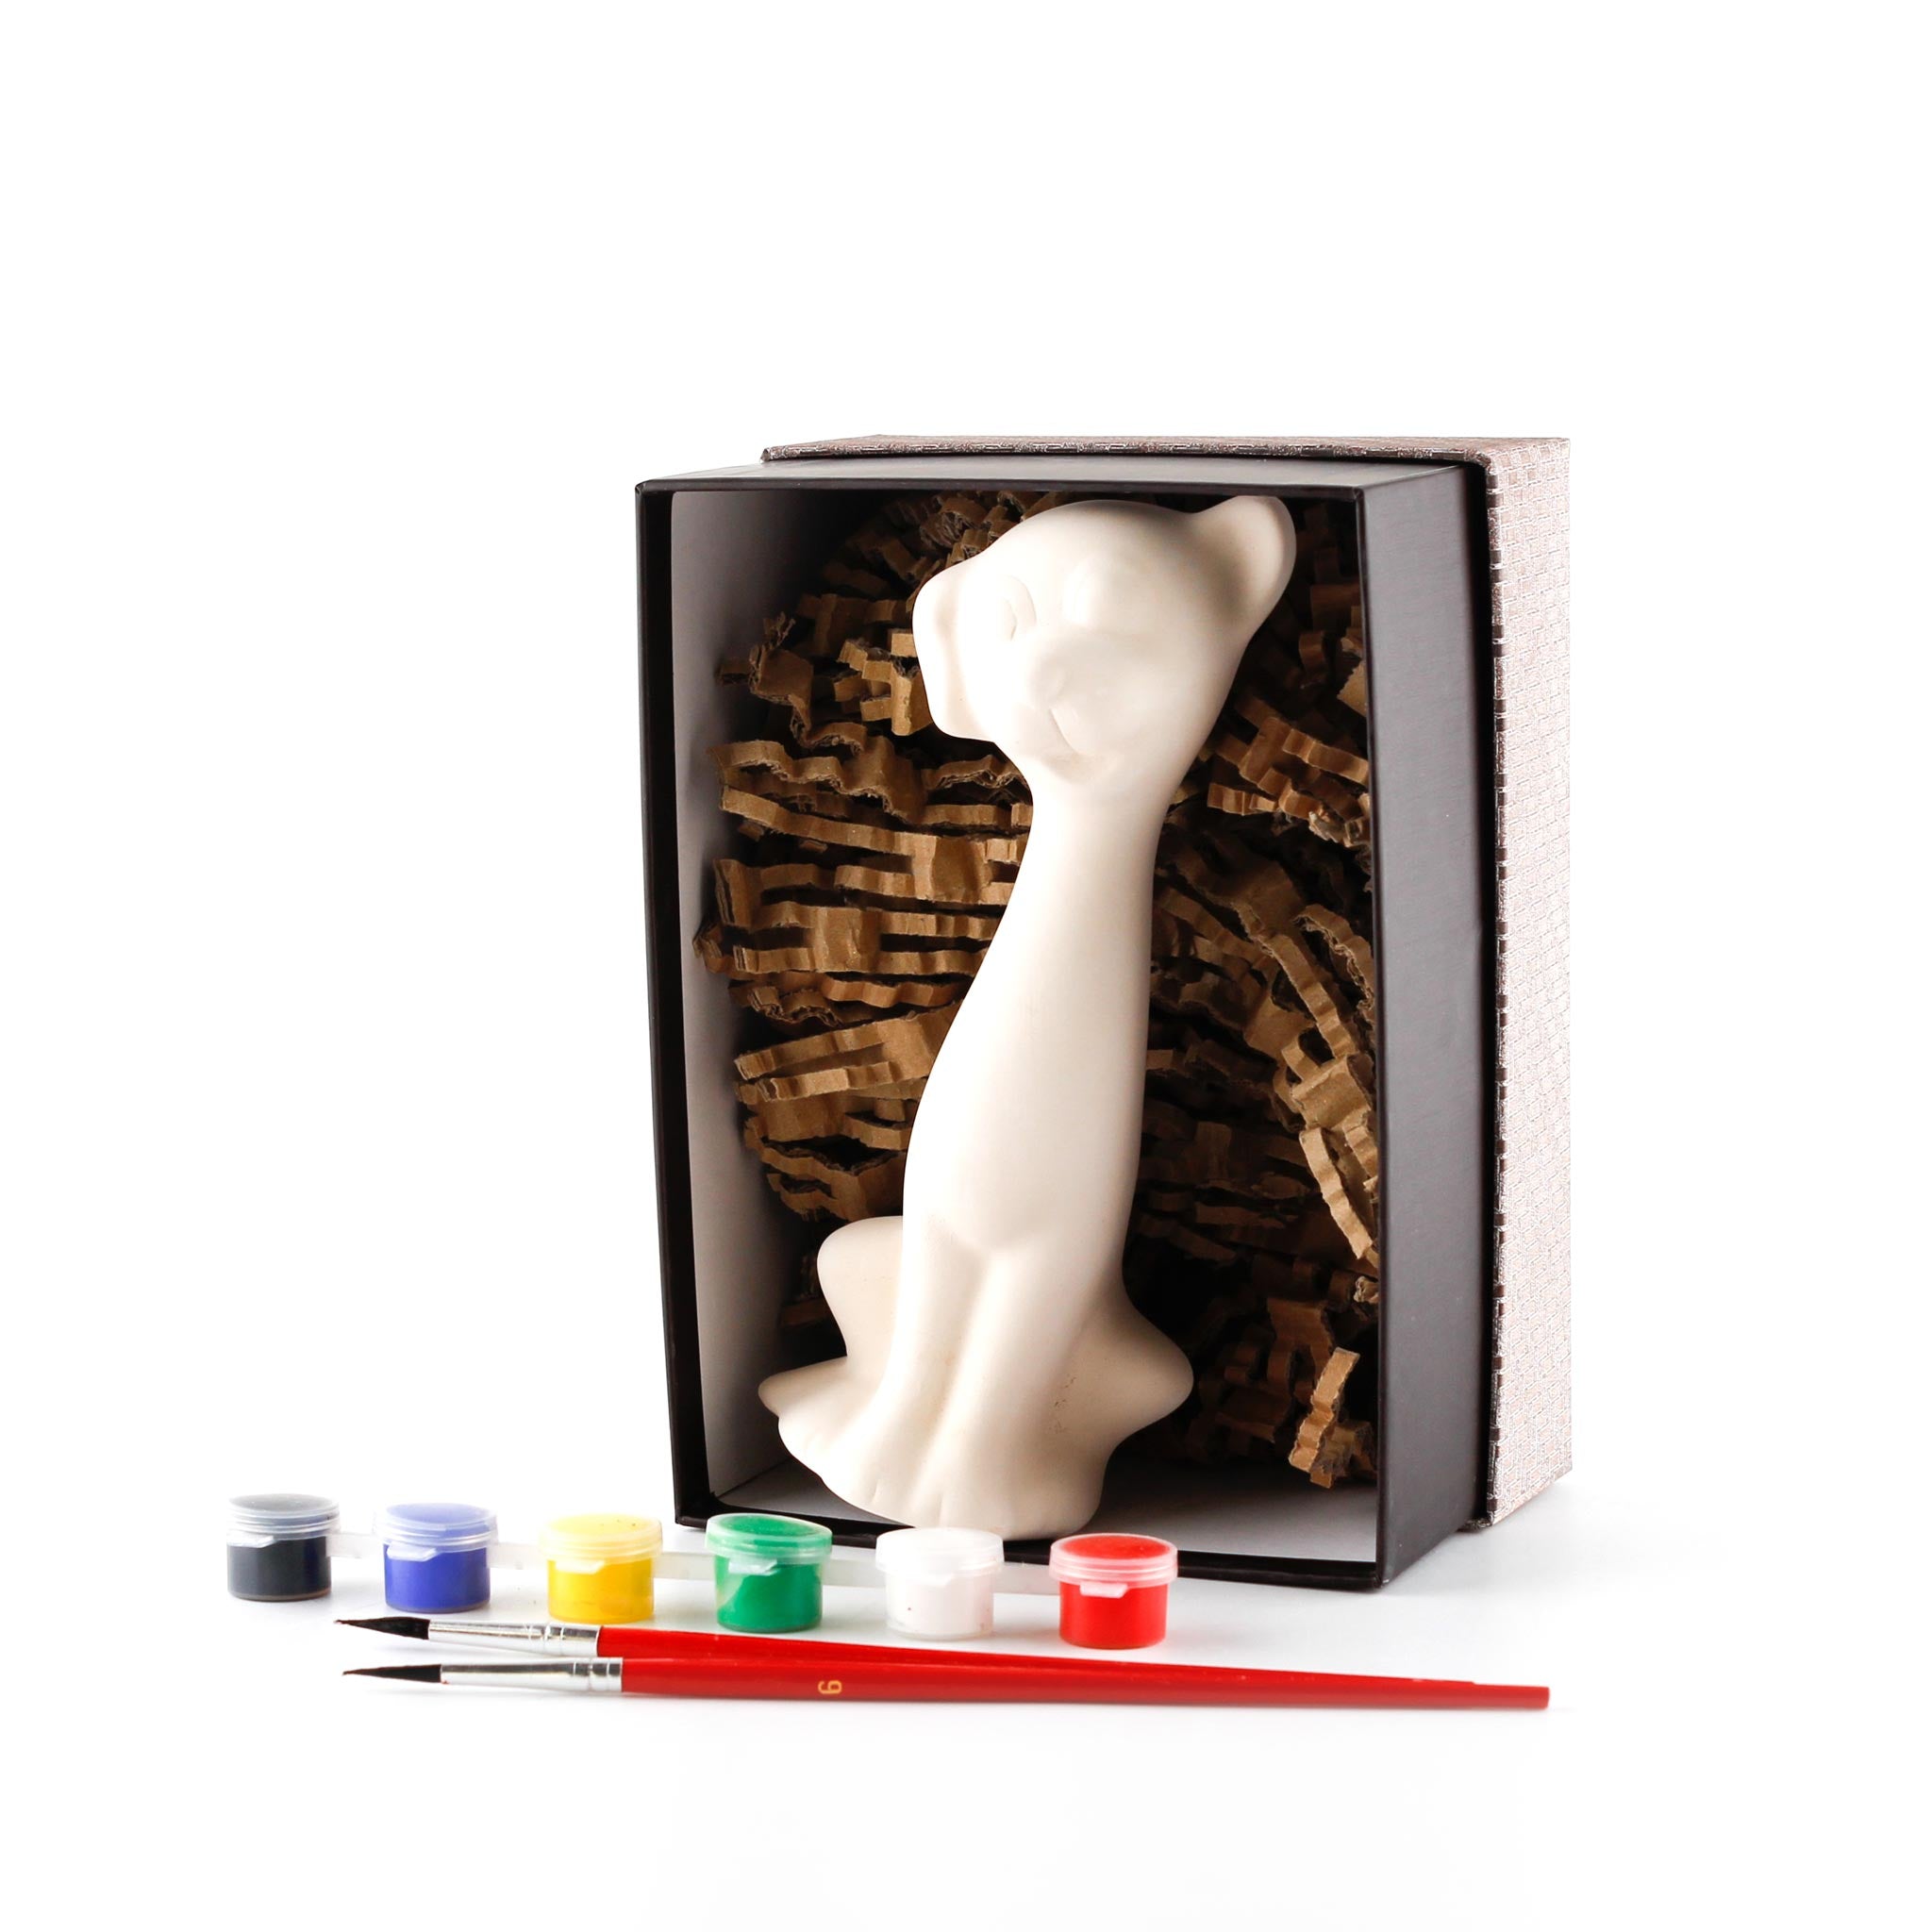 Ceramic dog in a sitting pose inside a paint your own gift box